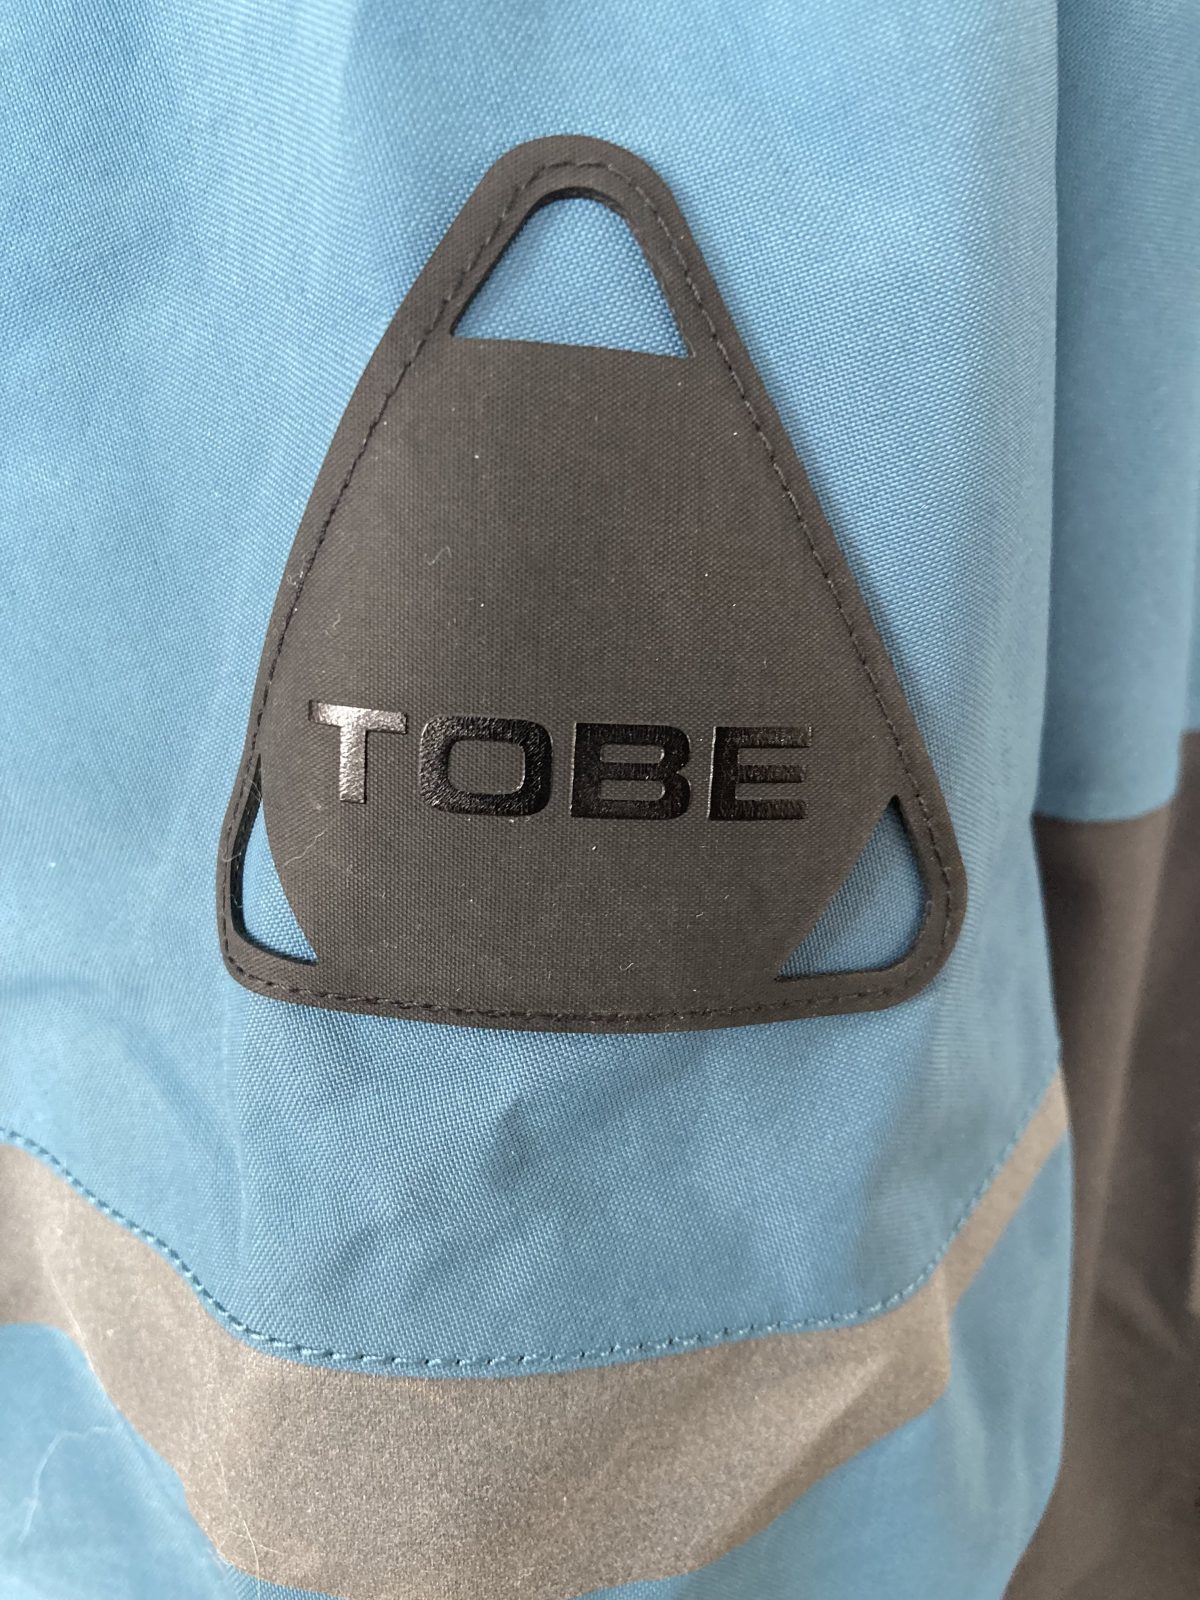 TOBE logo on the contego 3-in-1 jacket's sleeve